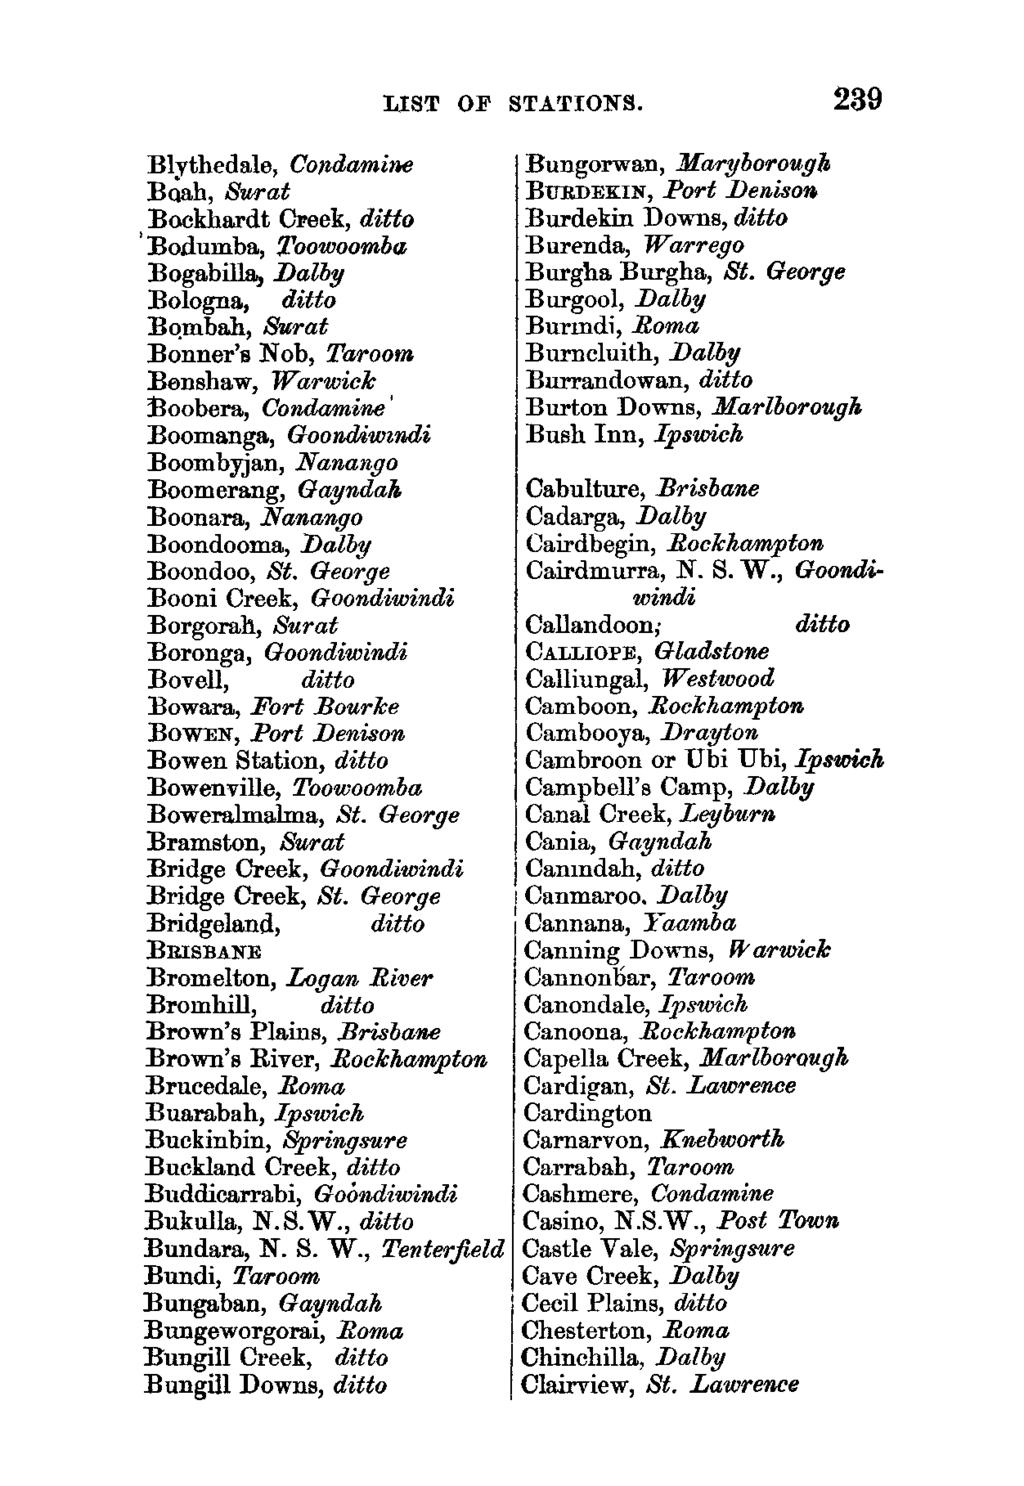 LIST OF STATIONS.